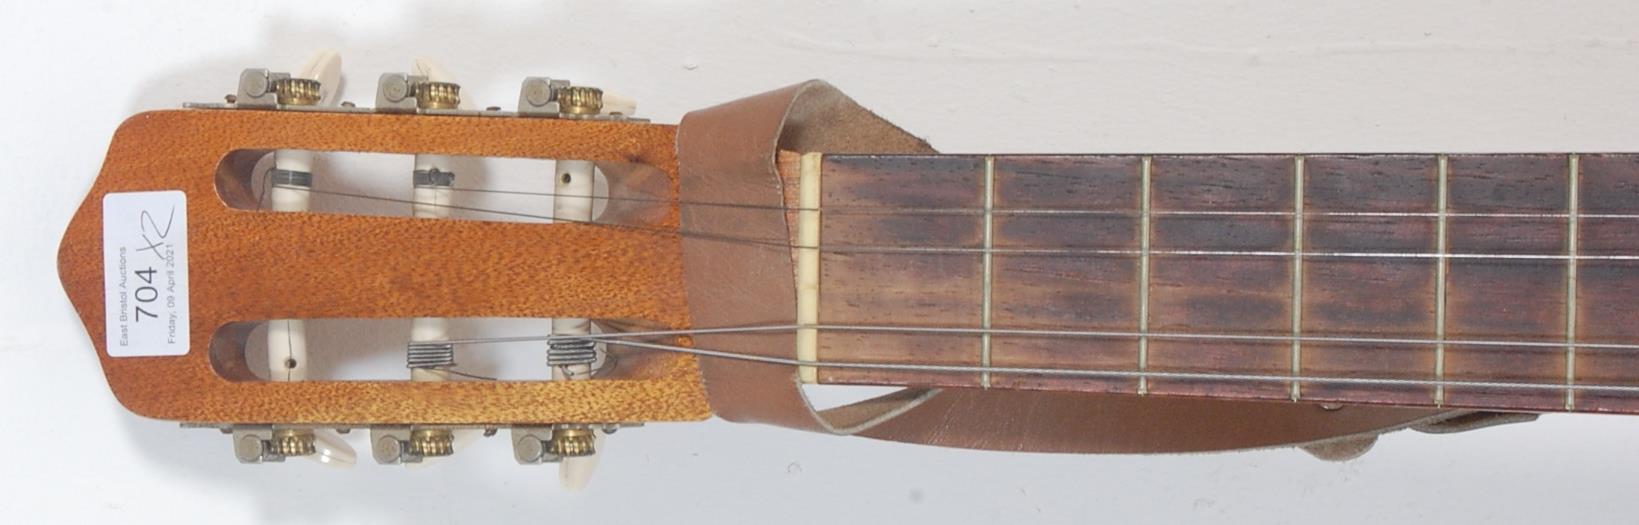 TWO VINTAGE 20TH CENTURY GUITARS - Image 6 of 12